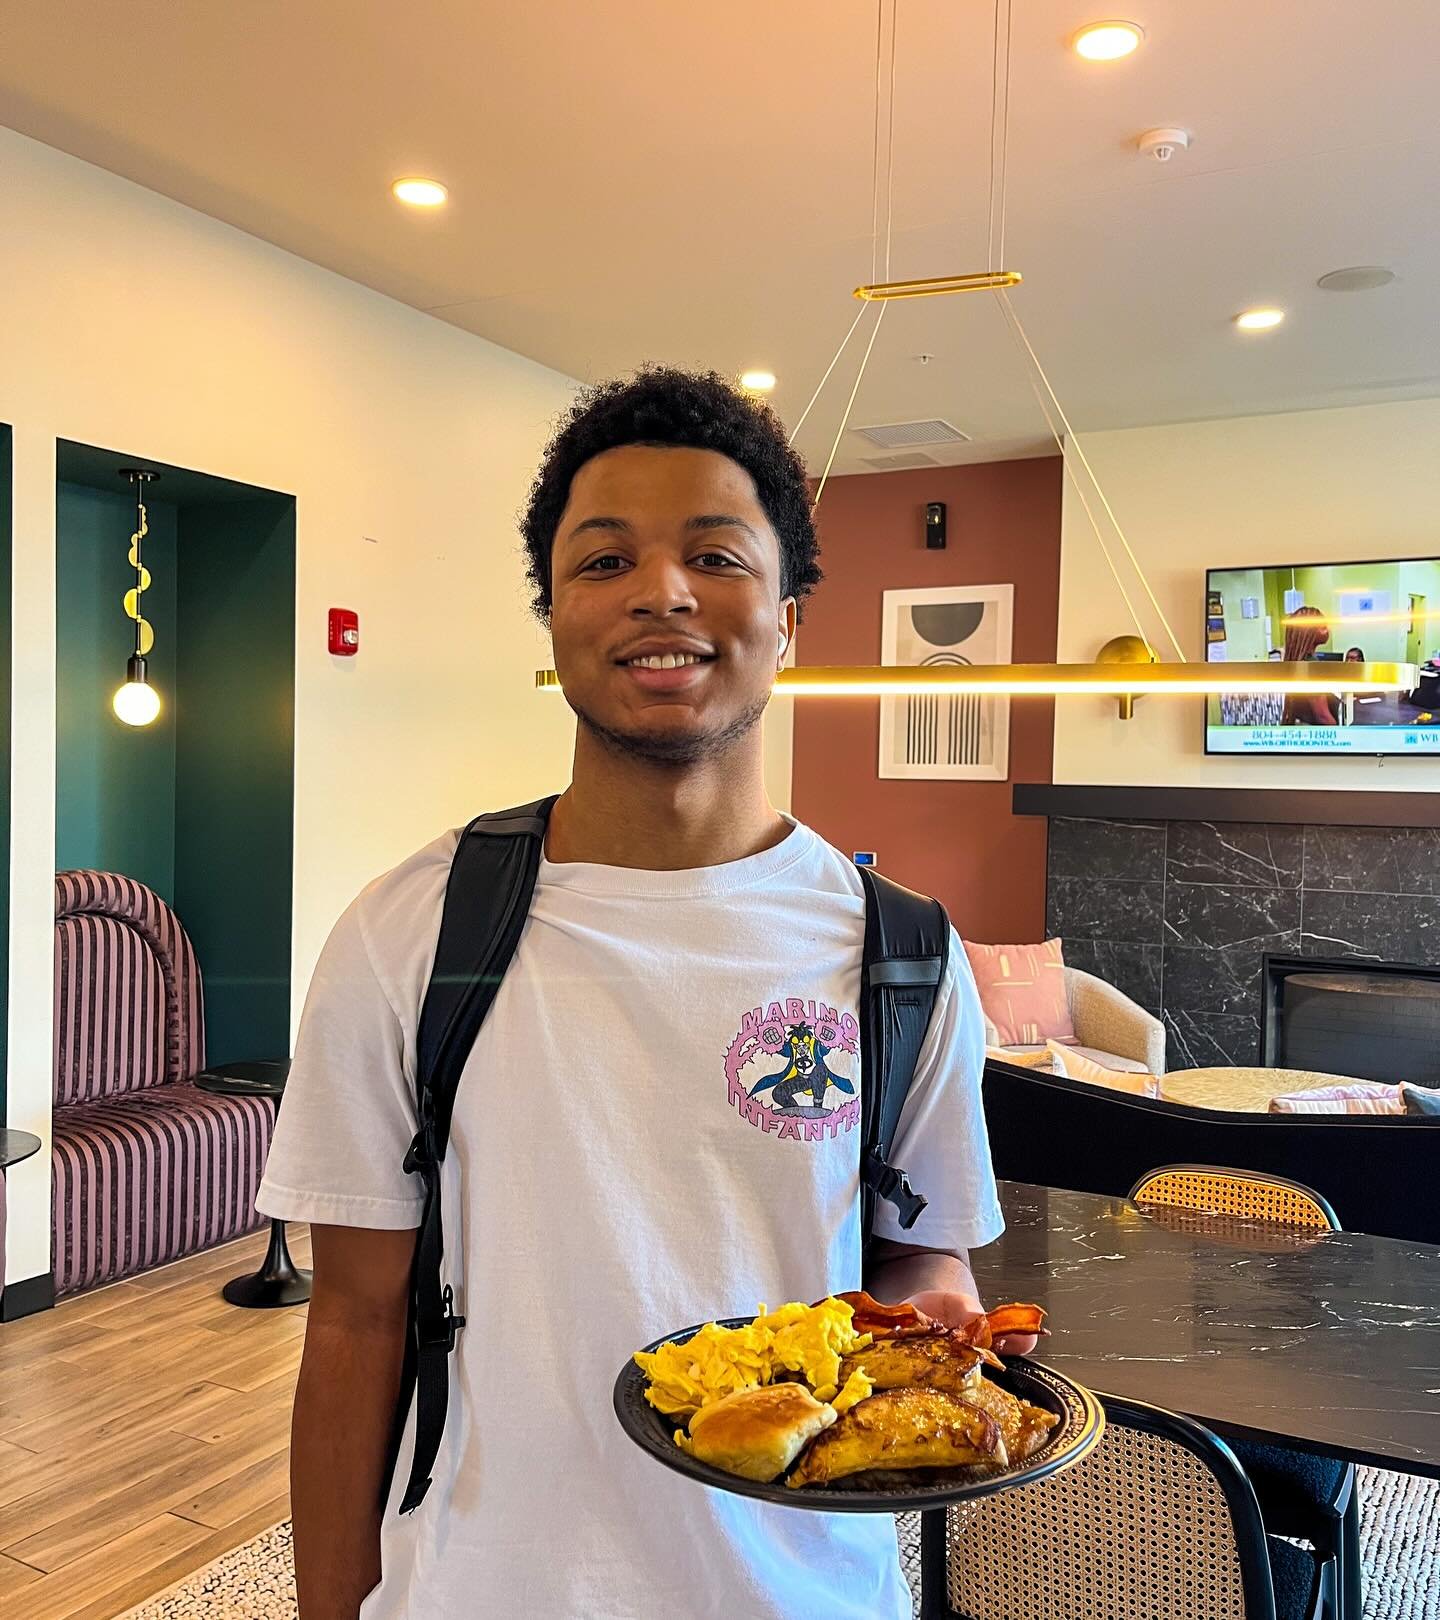 How was breakfast?! It was a pleasure seeing our residents grab a plate and interact. Keep an eye out for our upcoming resident events! We have a fun summer planned for you all 😎☀️
#AscendRVA #ResidentAppreciation